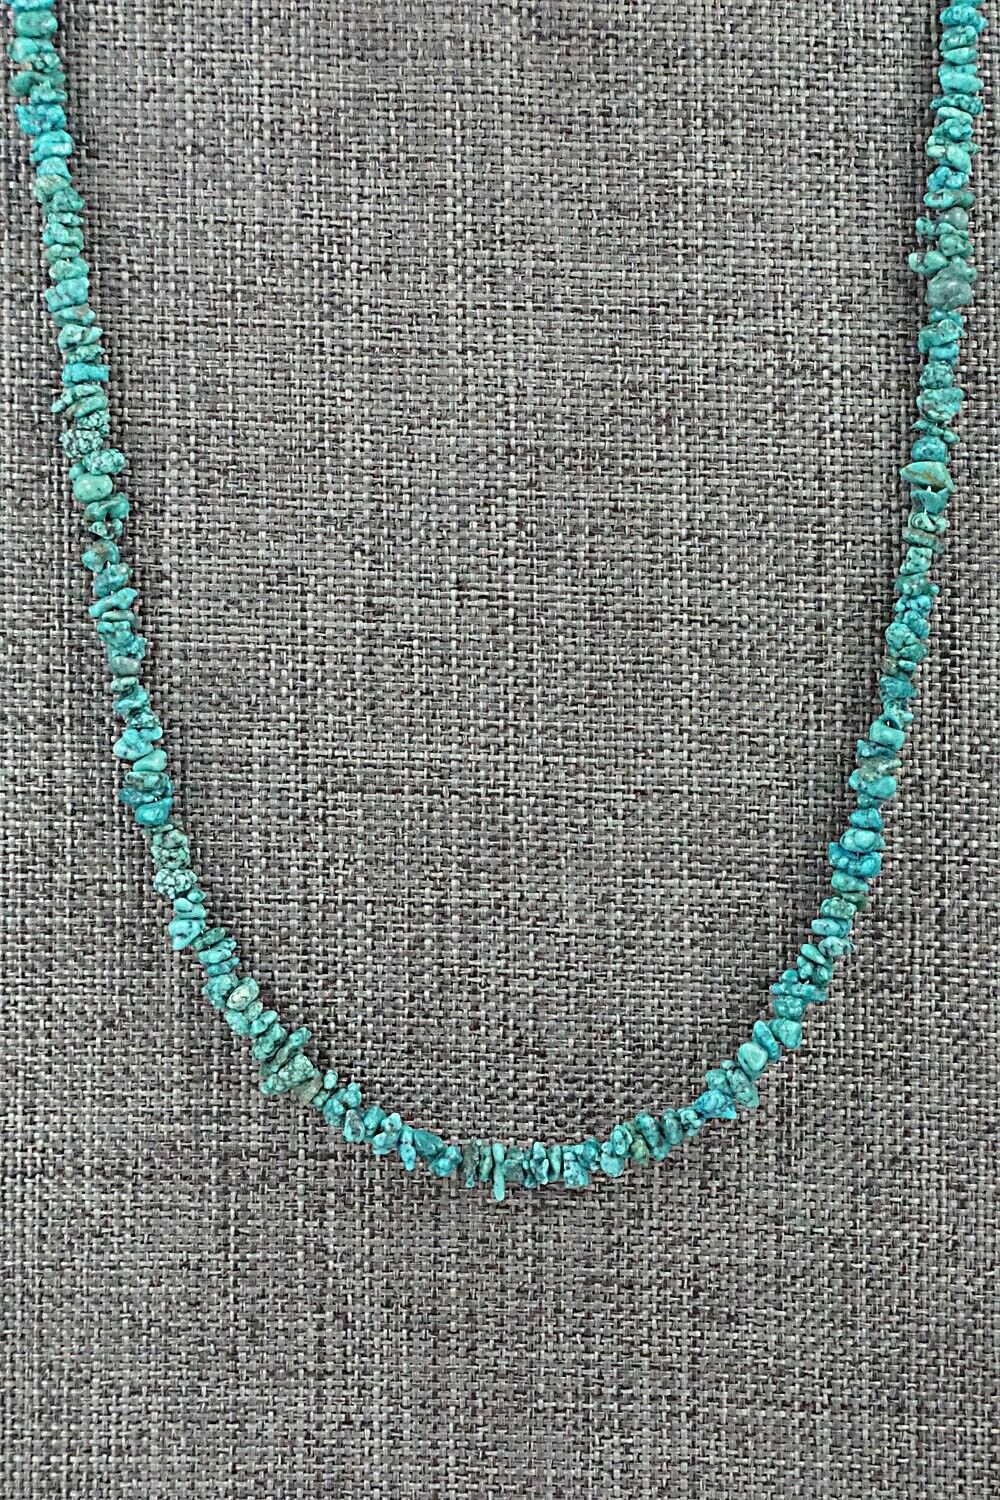 Turquoise & Sterling Silver Necklace 50" - Doreen Jake